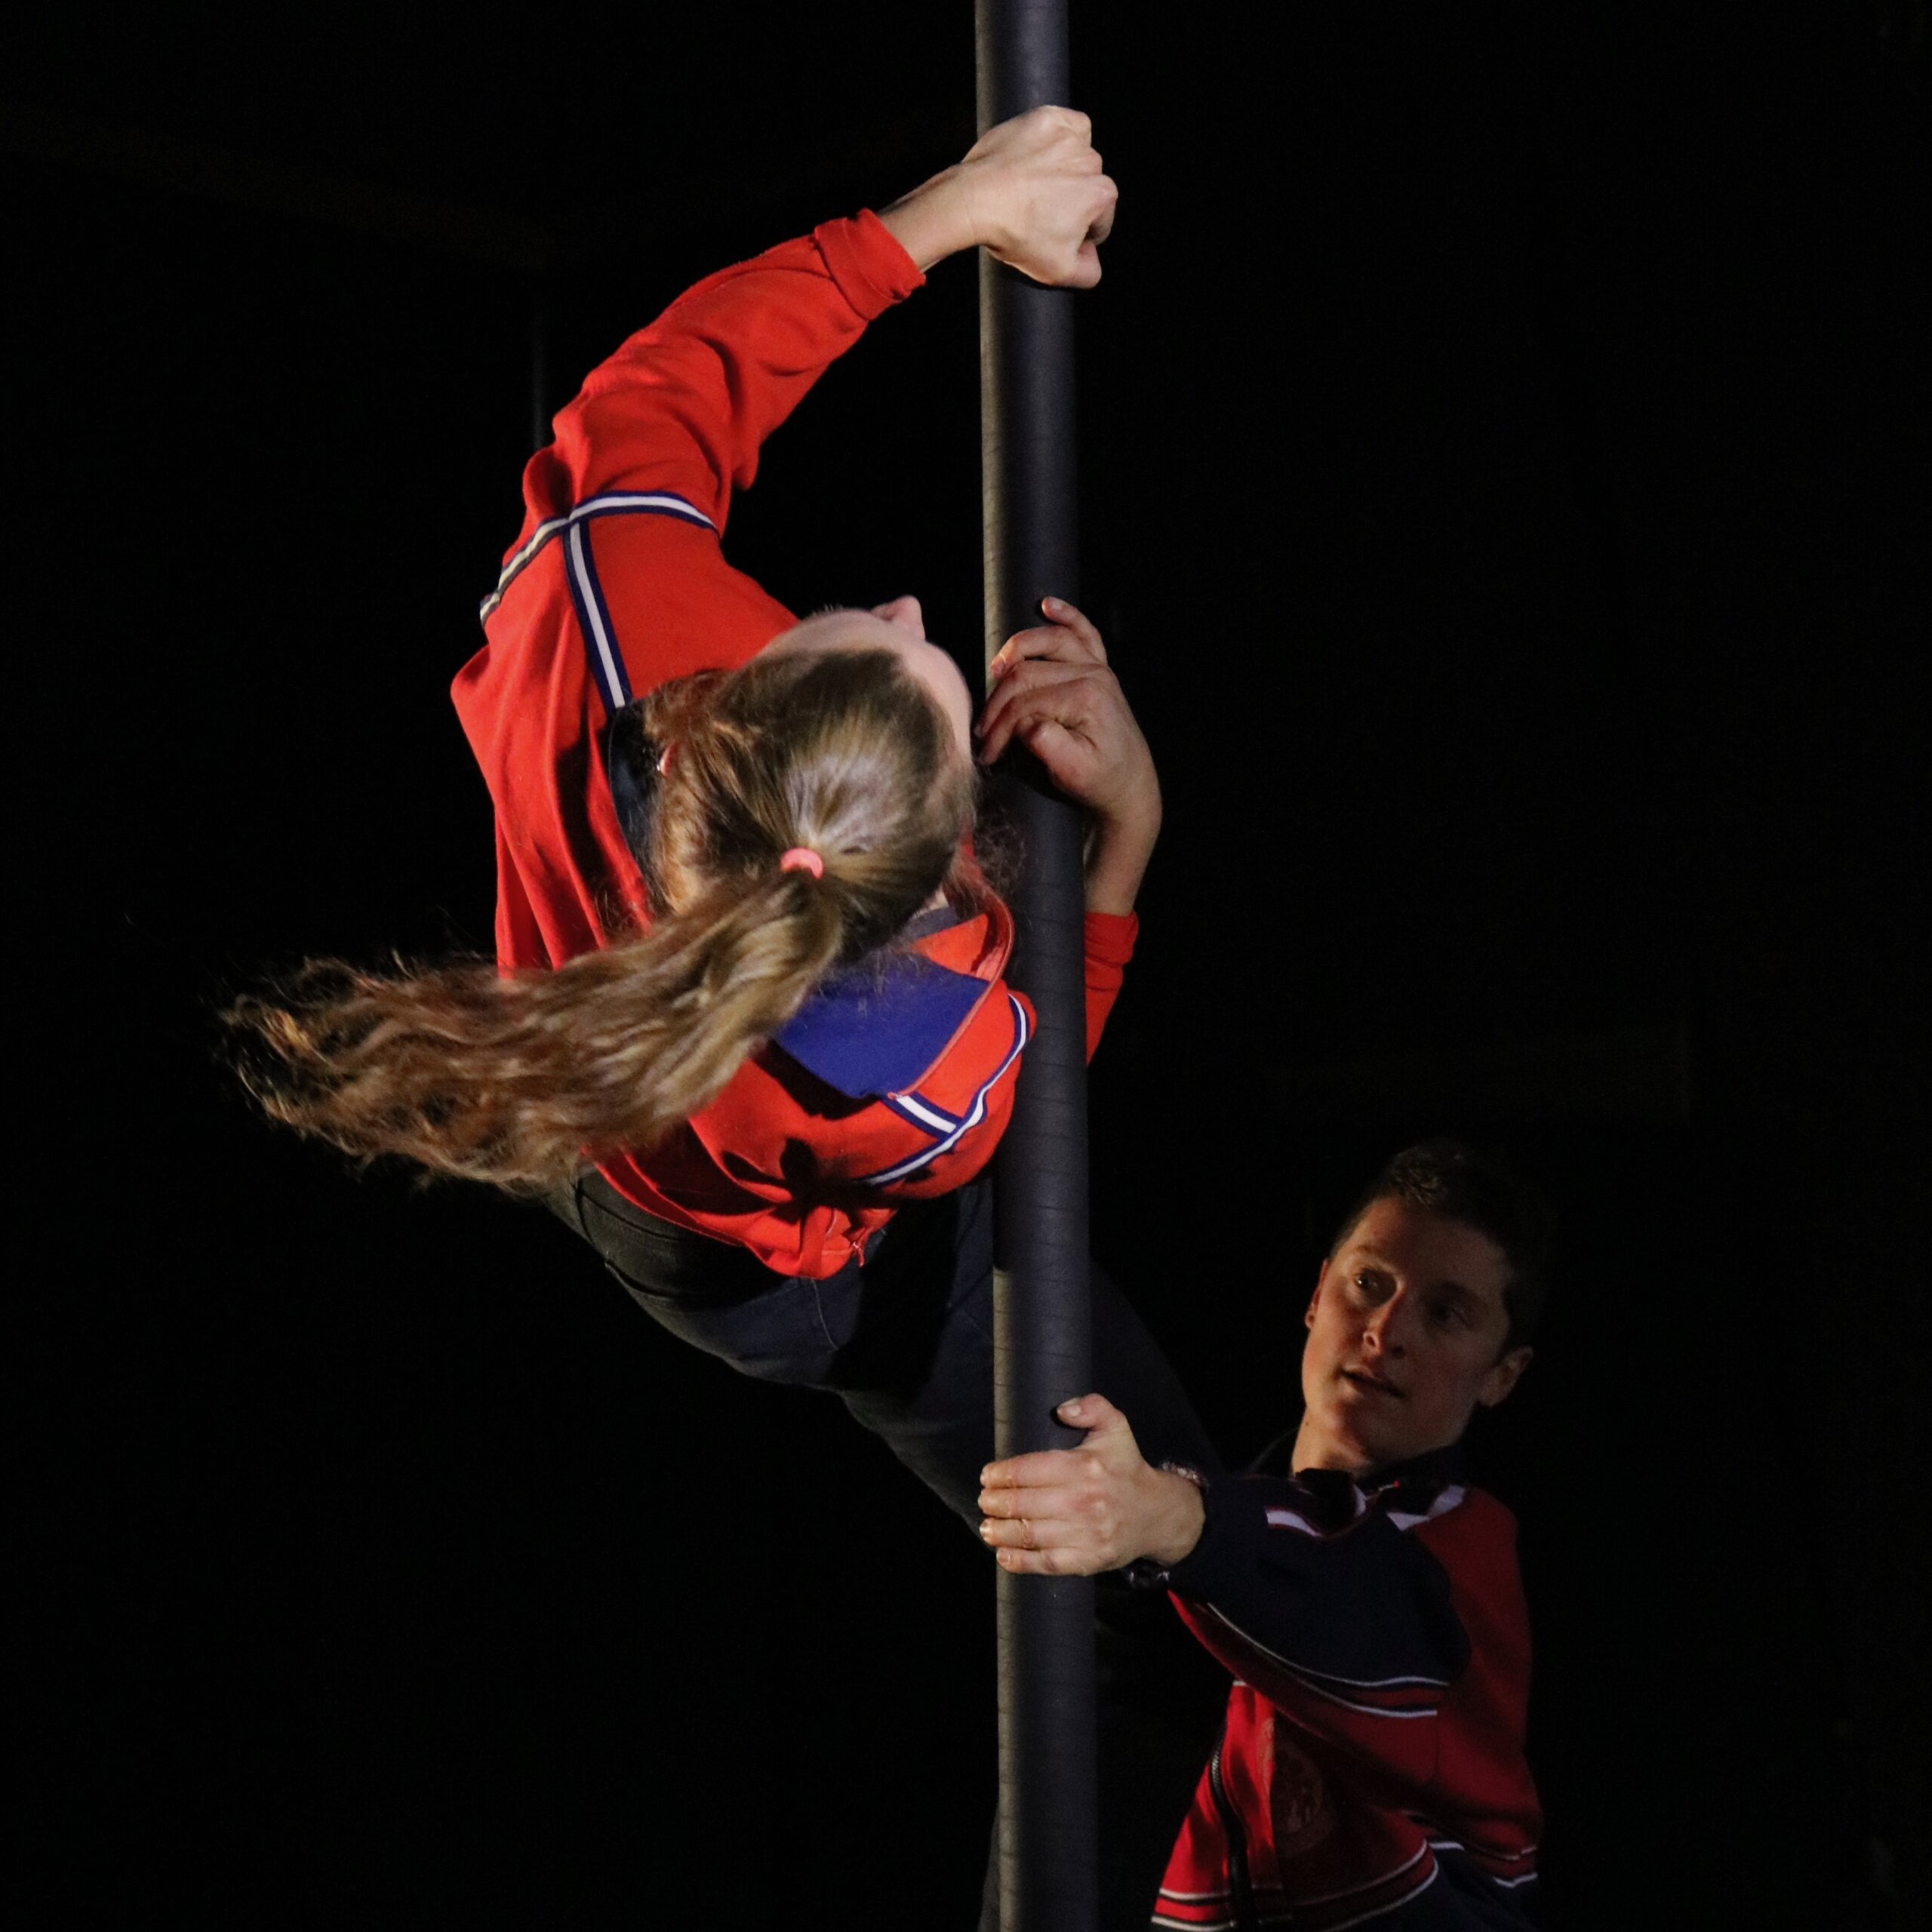 An acrobat in a red jacket does a flip on a black pole, while her sister watches from the other side of the pole.